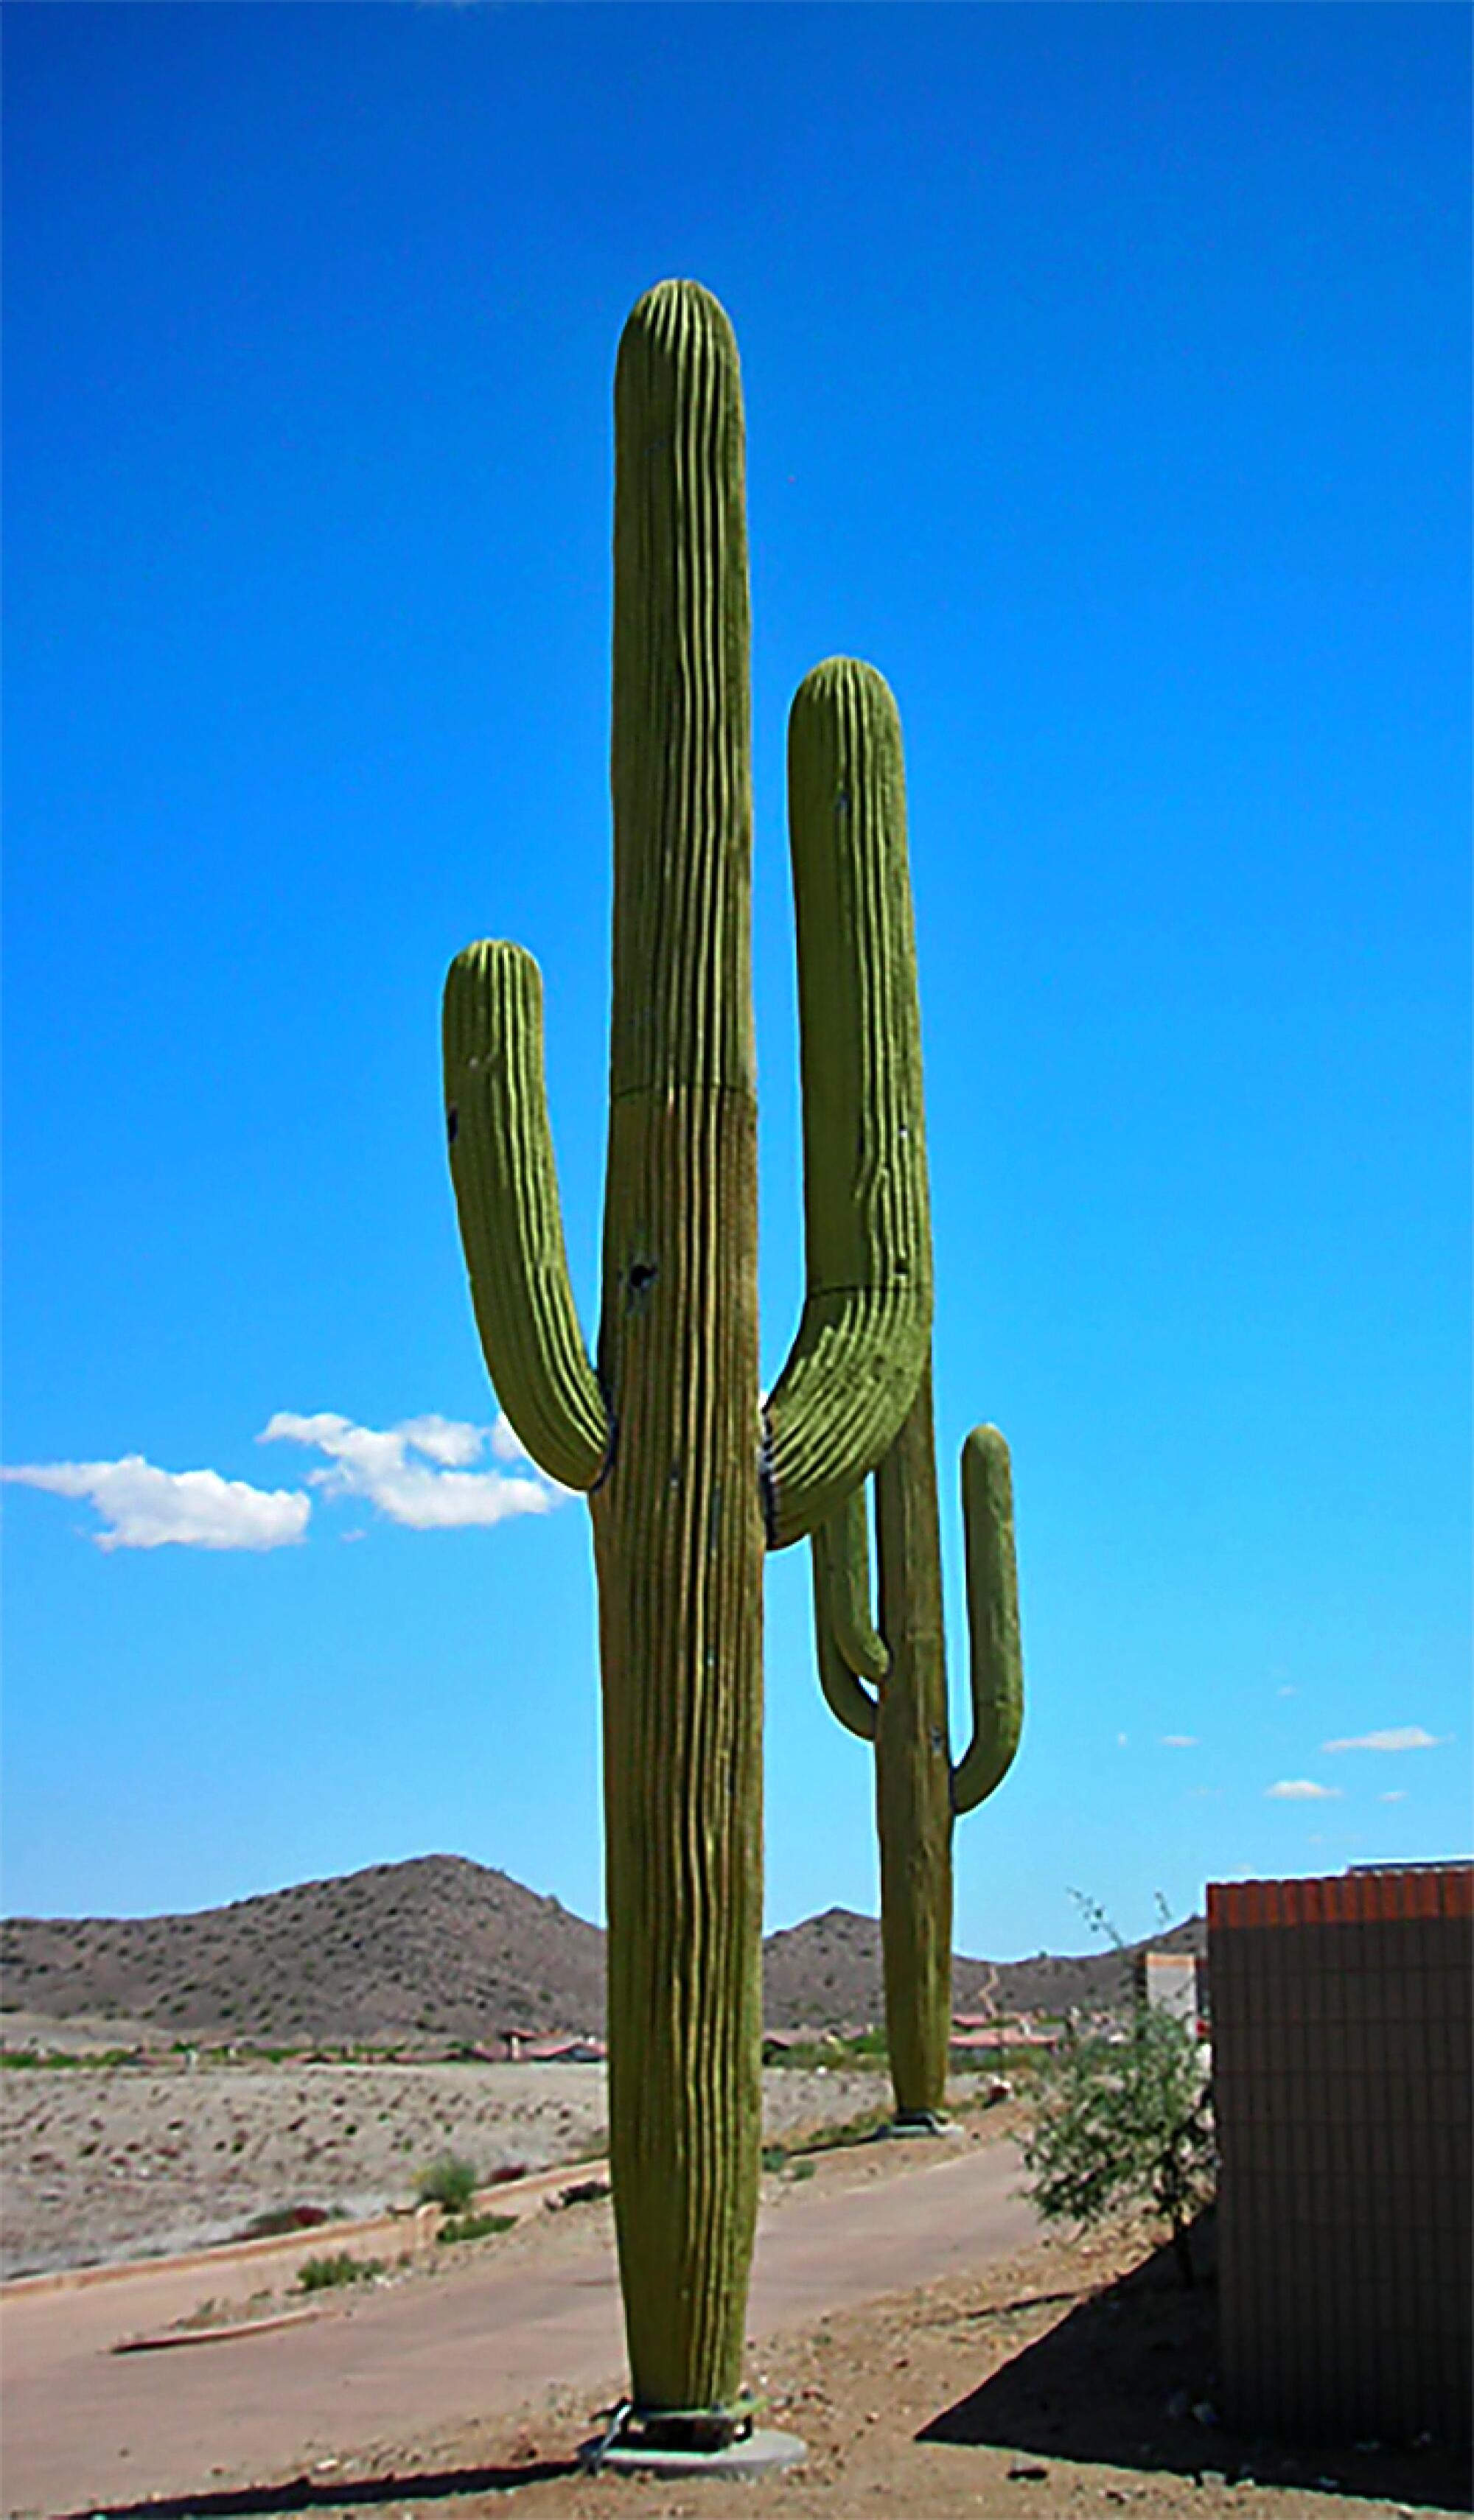 An image of a saguaro cactus cell tower.